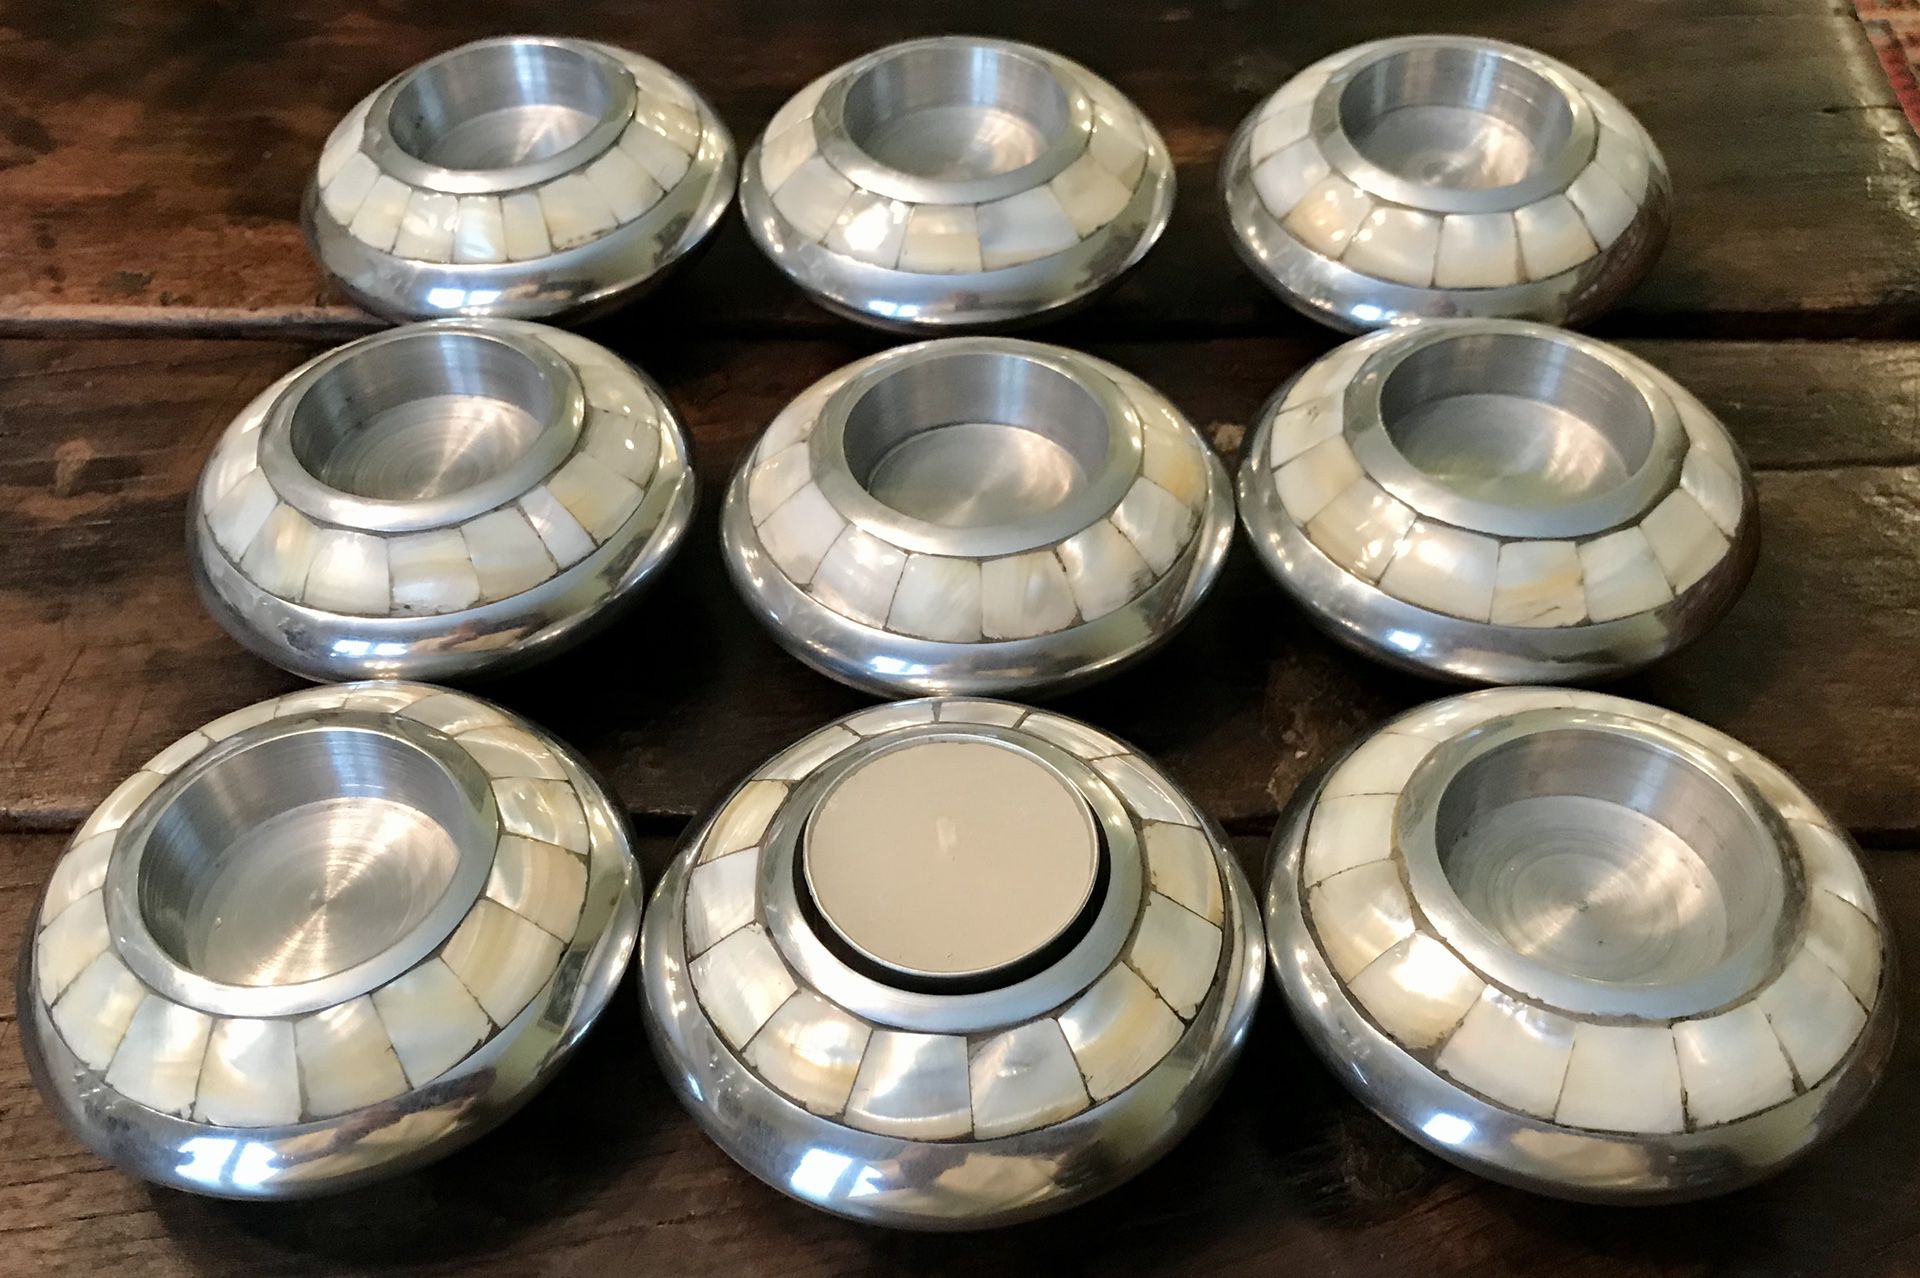 Set of 9 Mother of Pearl & Pewter candleholders ~ Dillard’s Biltmore Collection ~ votive candles